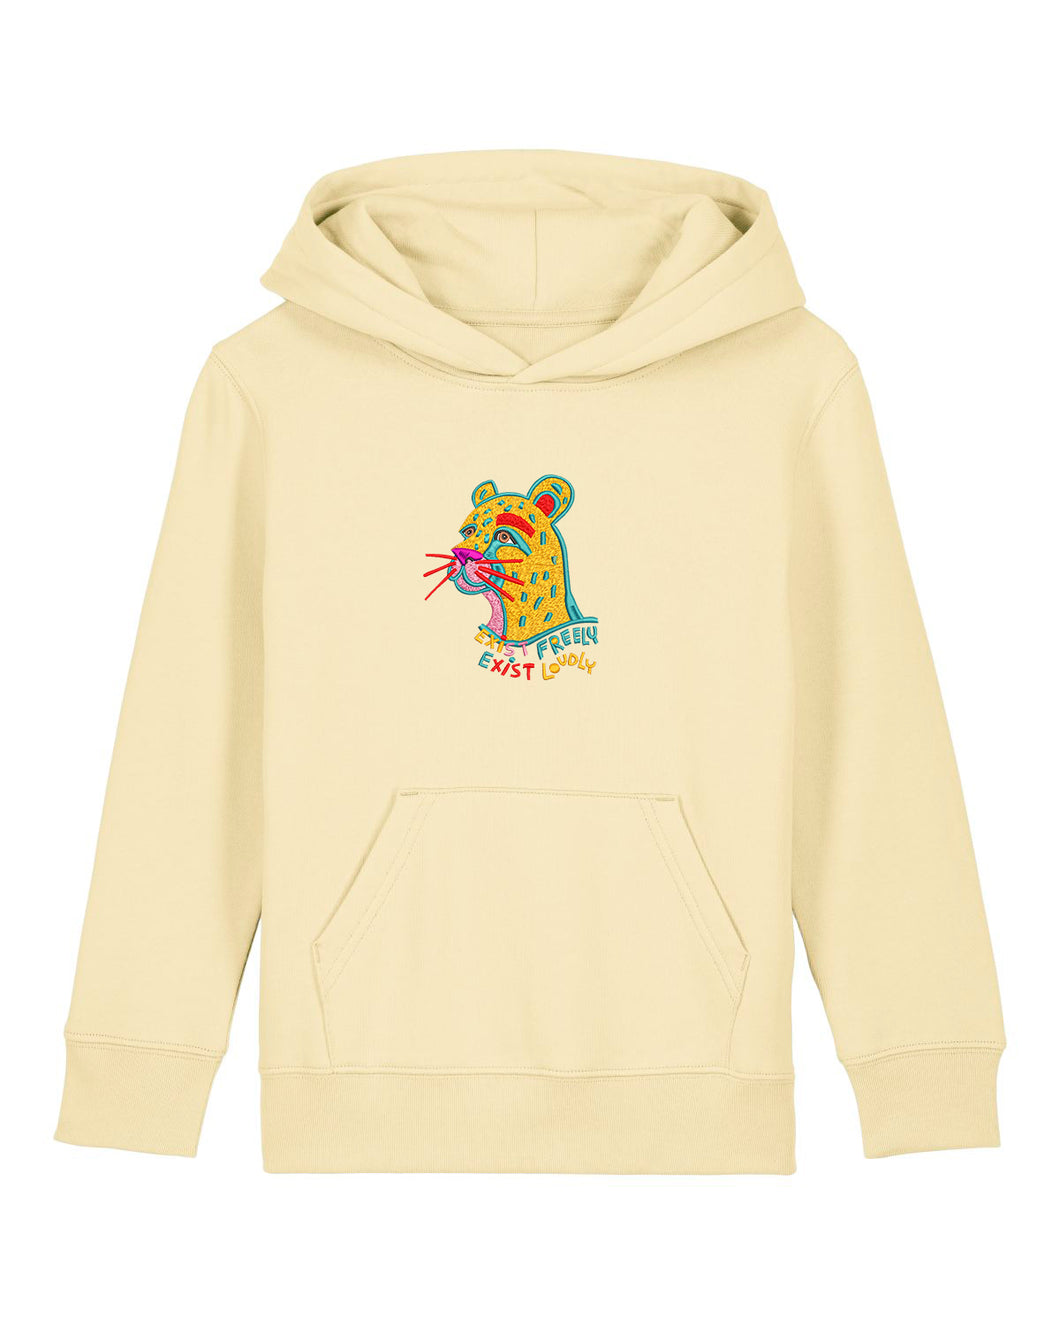 Cheetah 🐆 EXIST FREELY! EXIST LOUDLY!  - Embroidered UNISEX KIDS hoodie